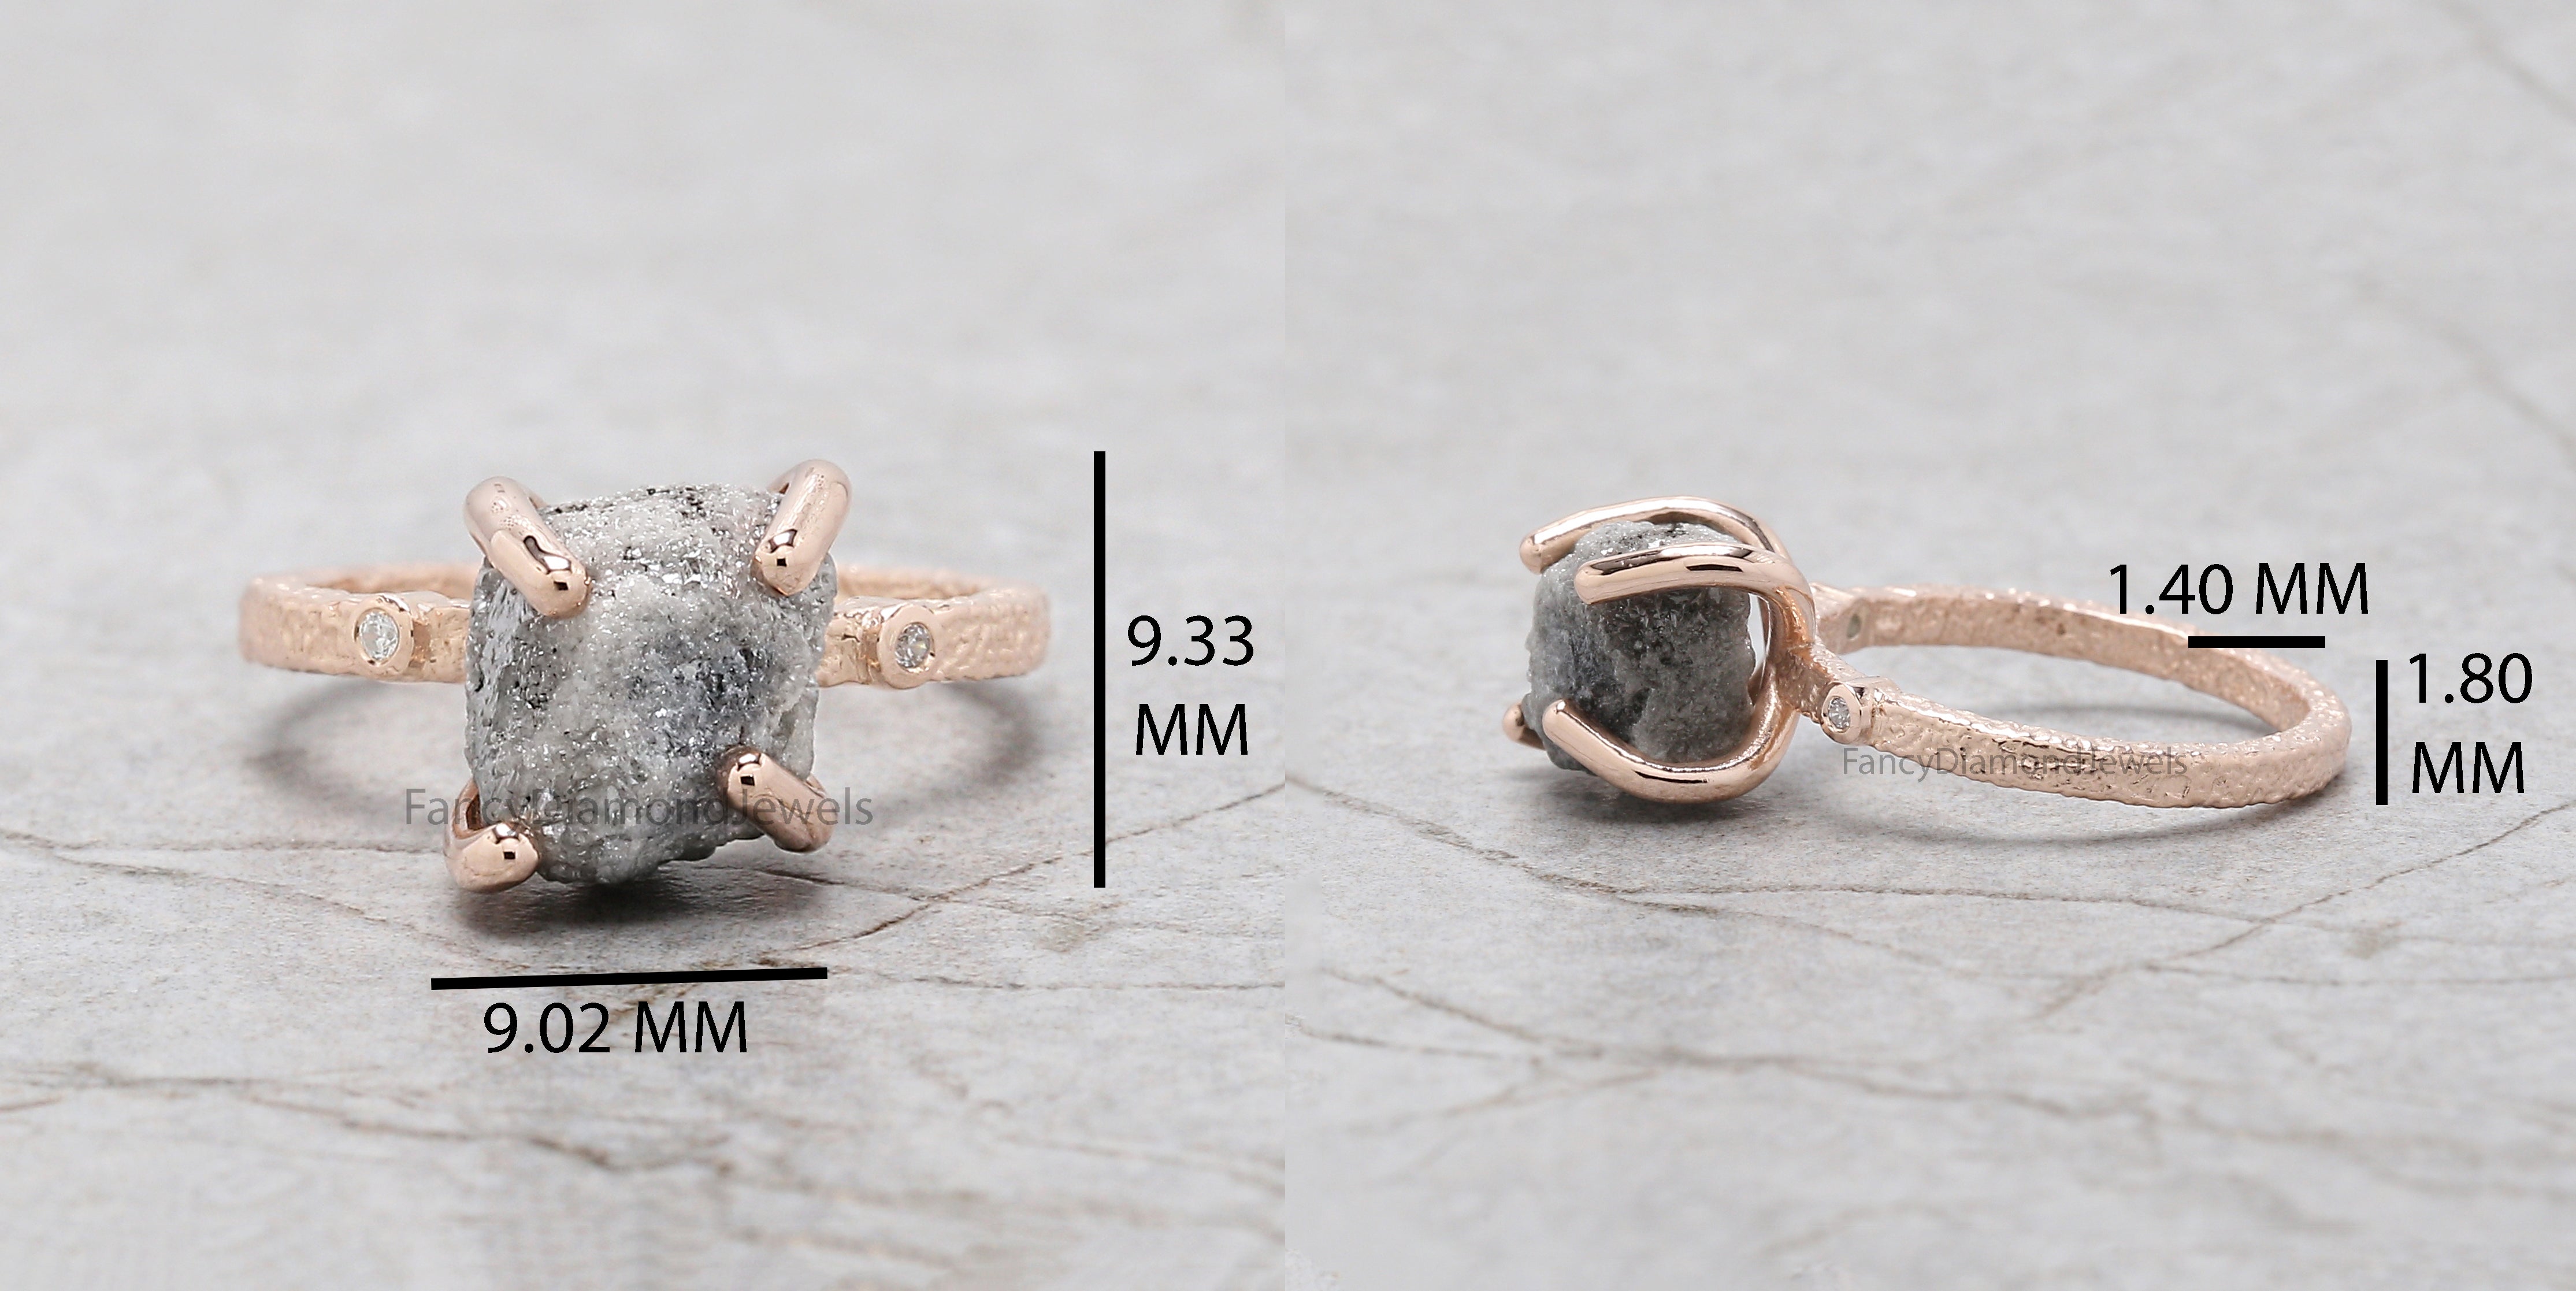 Rough Grey Color Diamond Ring 5.22 Ct 10.38 MM Rough Uncut Diamond Ring 14K Solid Rose Gold Silver Engagement Ring Gift For Her QL2639